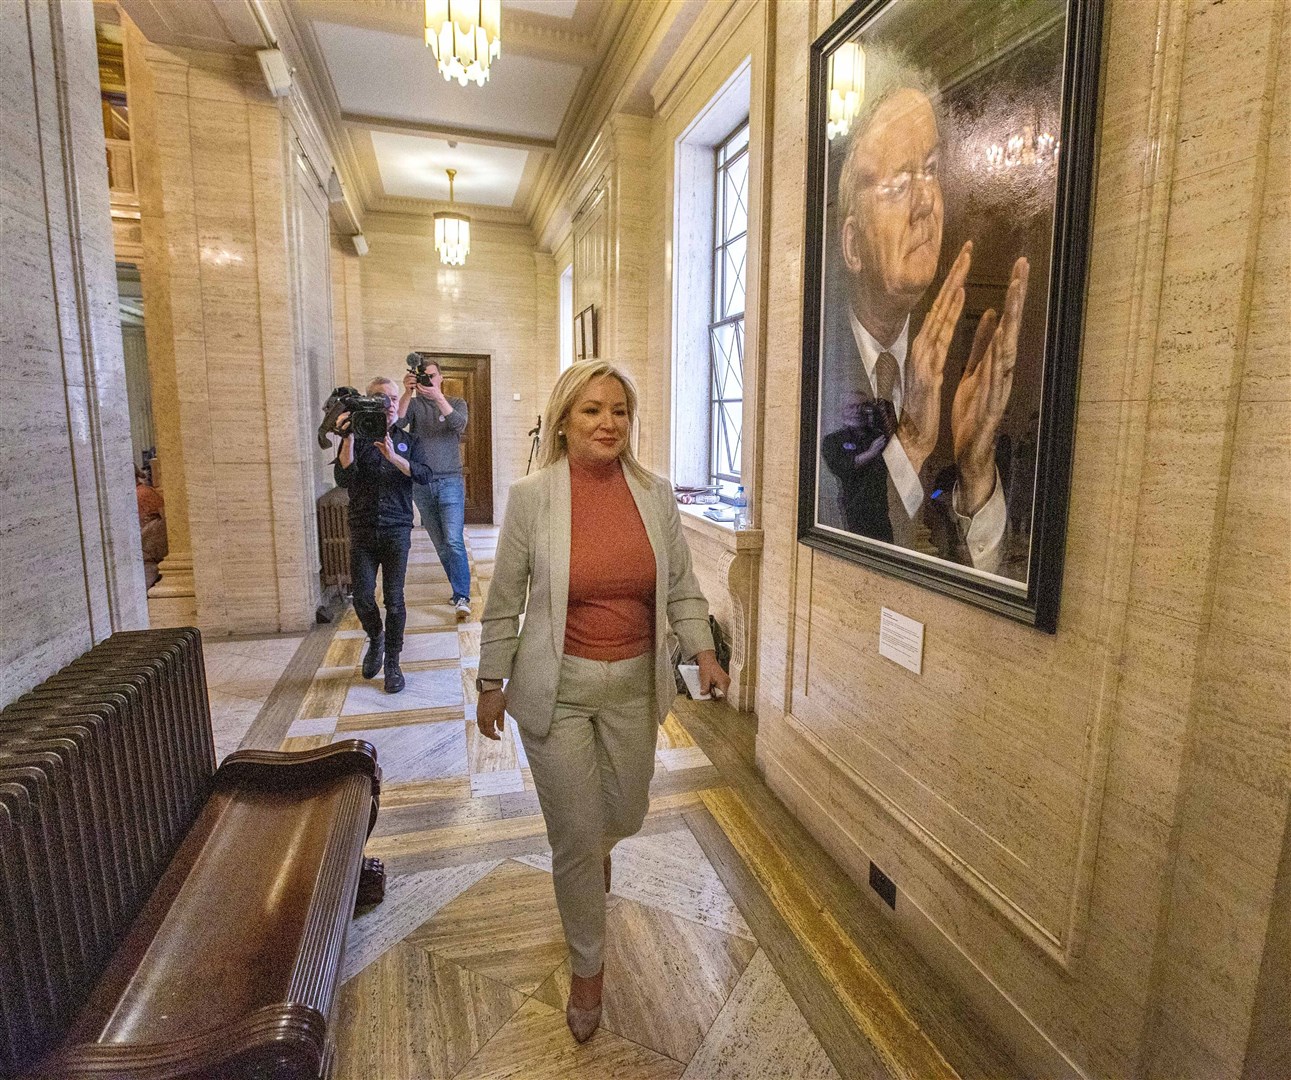 Sinn Fein vice president Michelle O’Neill walks passed a portrait of former Deputy First Minister Martin McGuinness hanging in the Great Hall of Parliament Buildings at Stormont (Liam McBurney/PA)